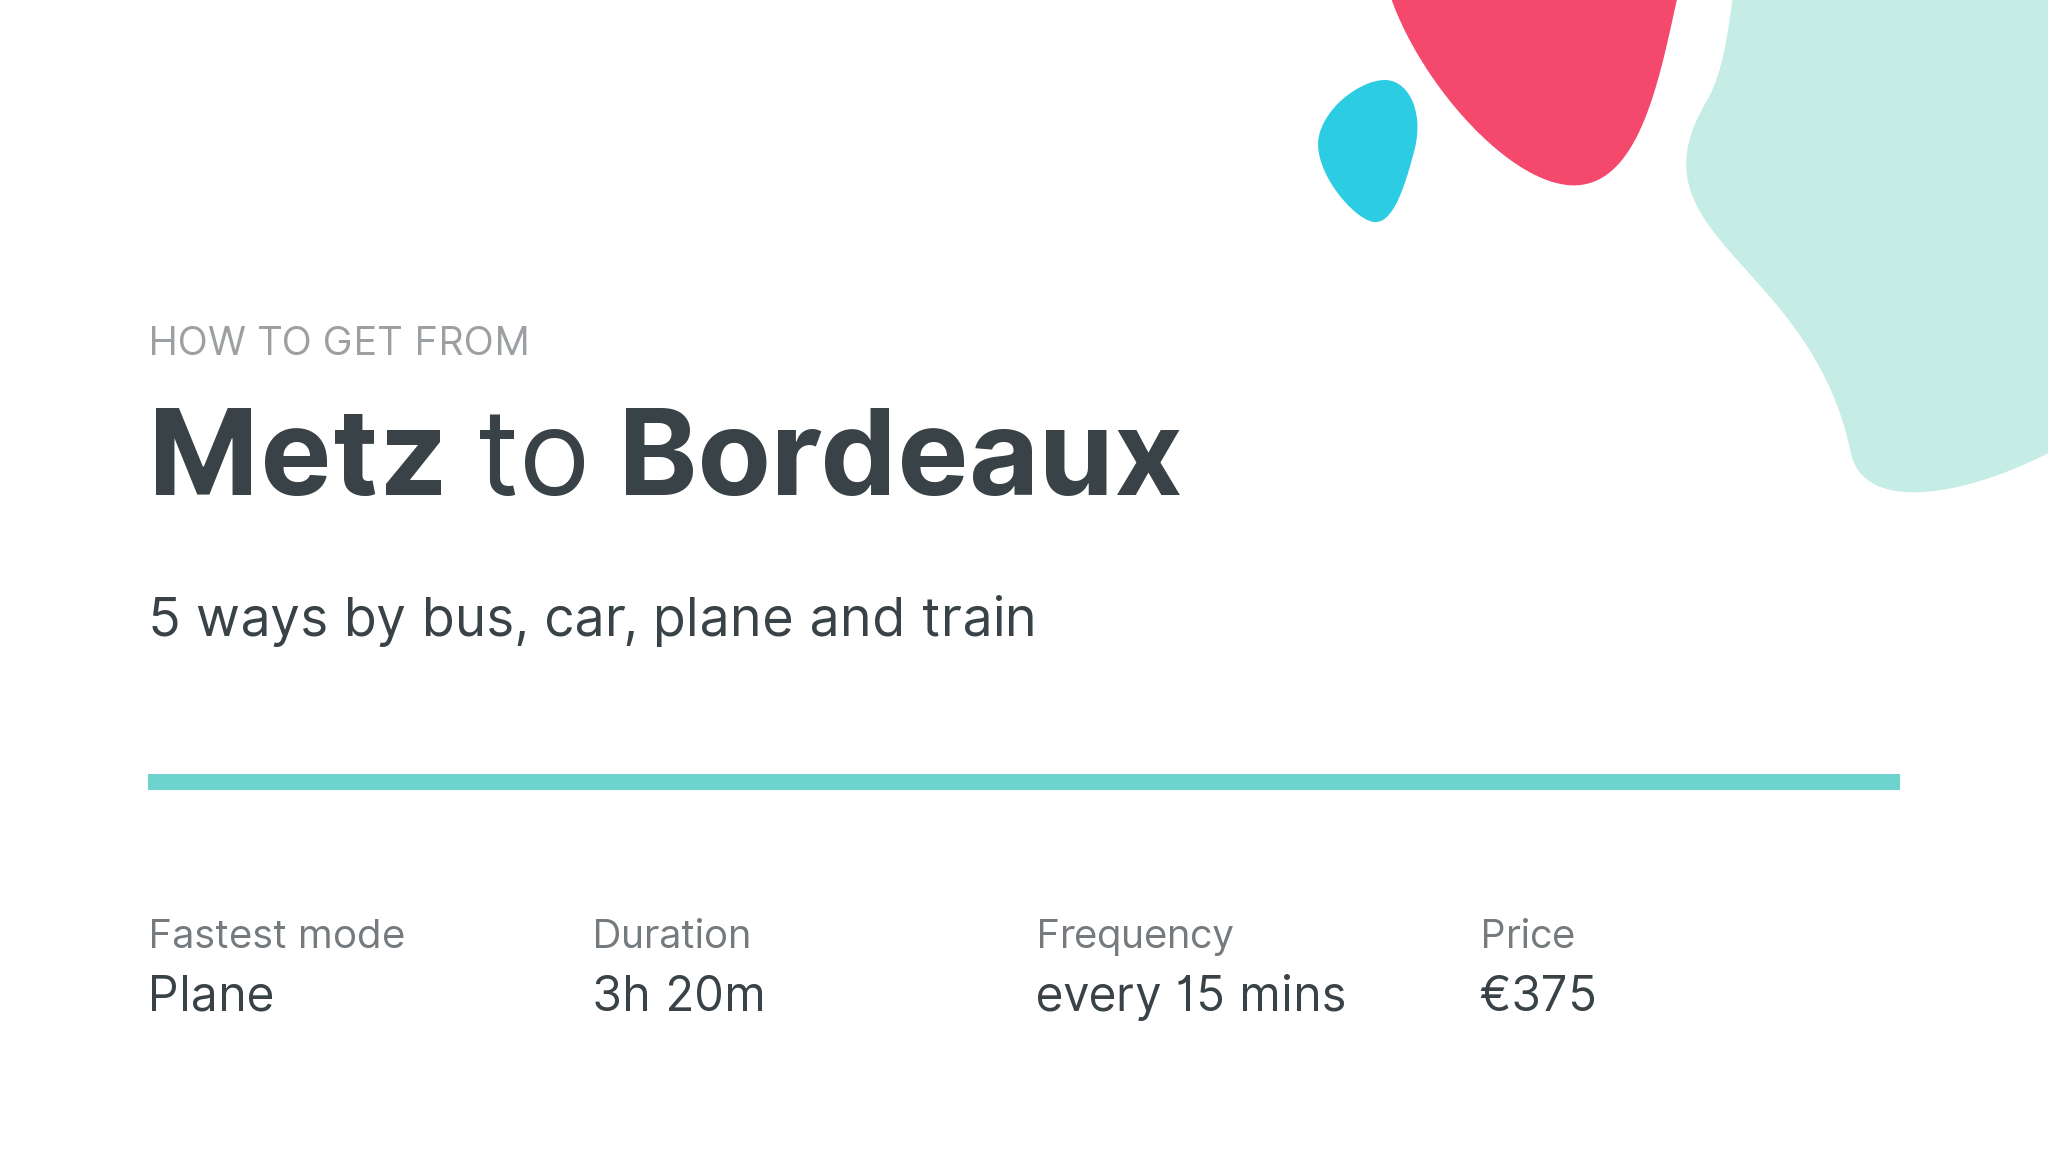 How do I get from Metz to Bordeaux